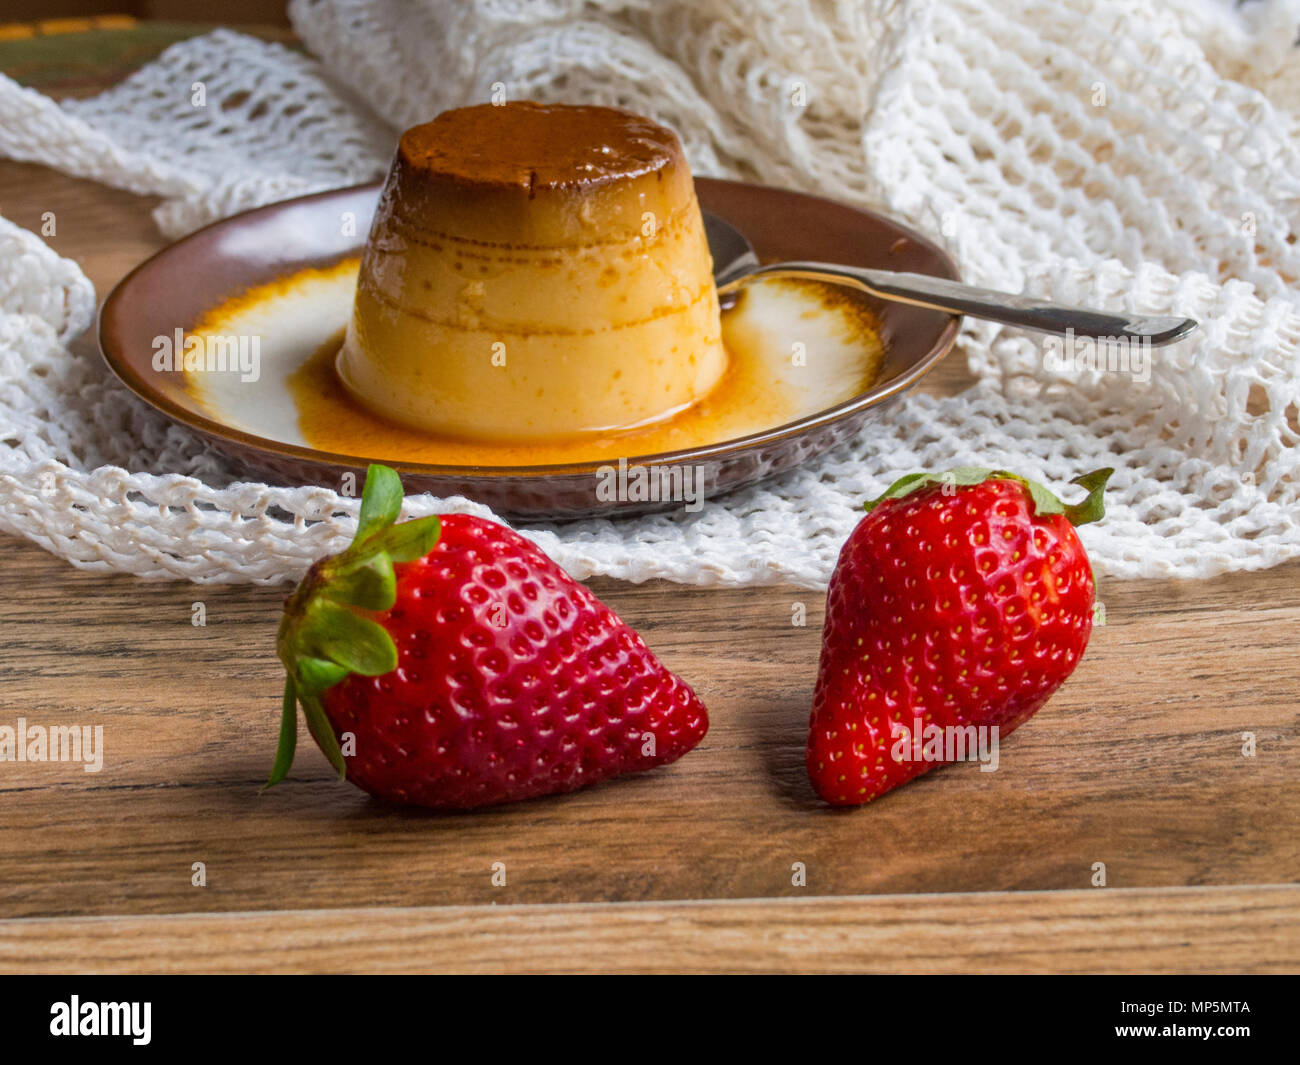 Flan in a plate on wood background Stock Photo